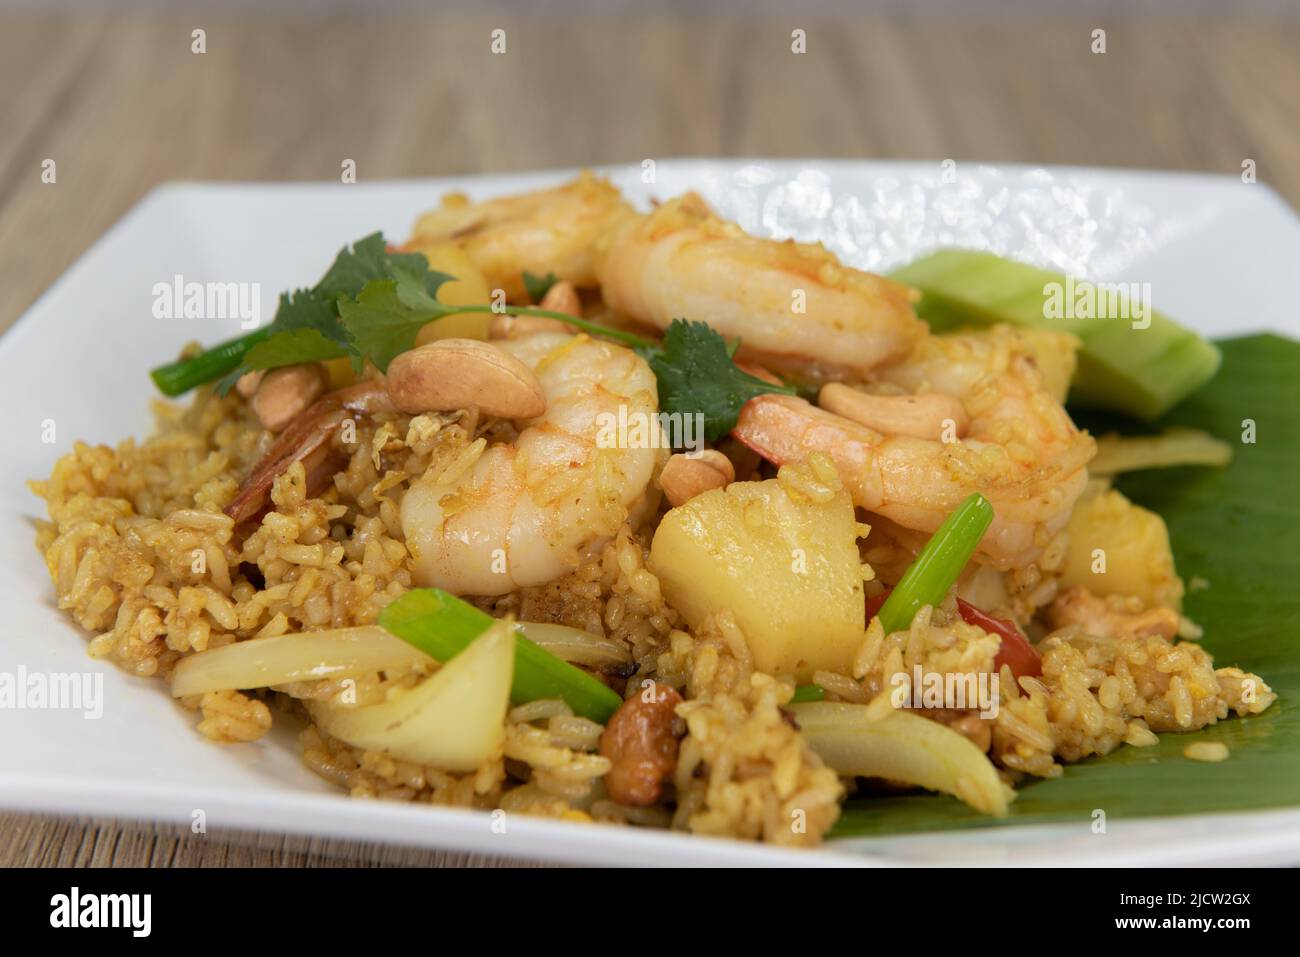 Pineapple fried rice plate topped with large shrimp, generous slices of cucumber and ready to eat. Stock Photo